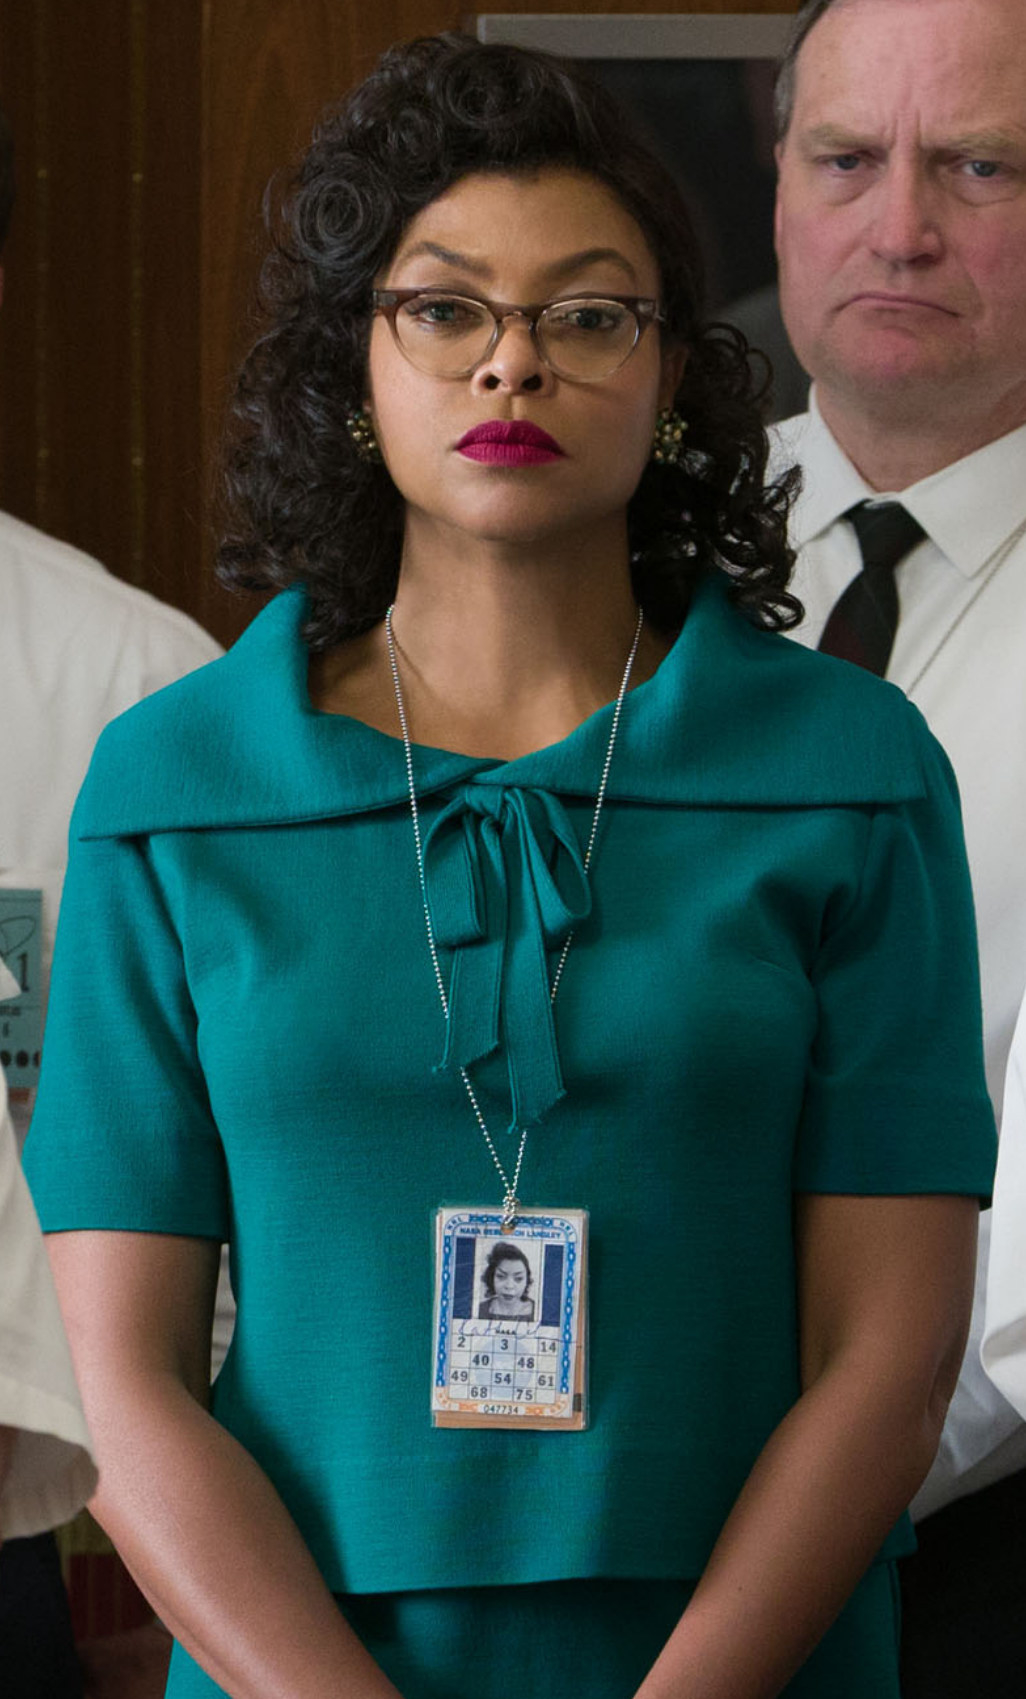 Henson wearing glasses, 1950s dress, and bright lipstick in a meeting surrounded by white men